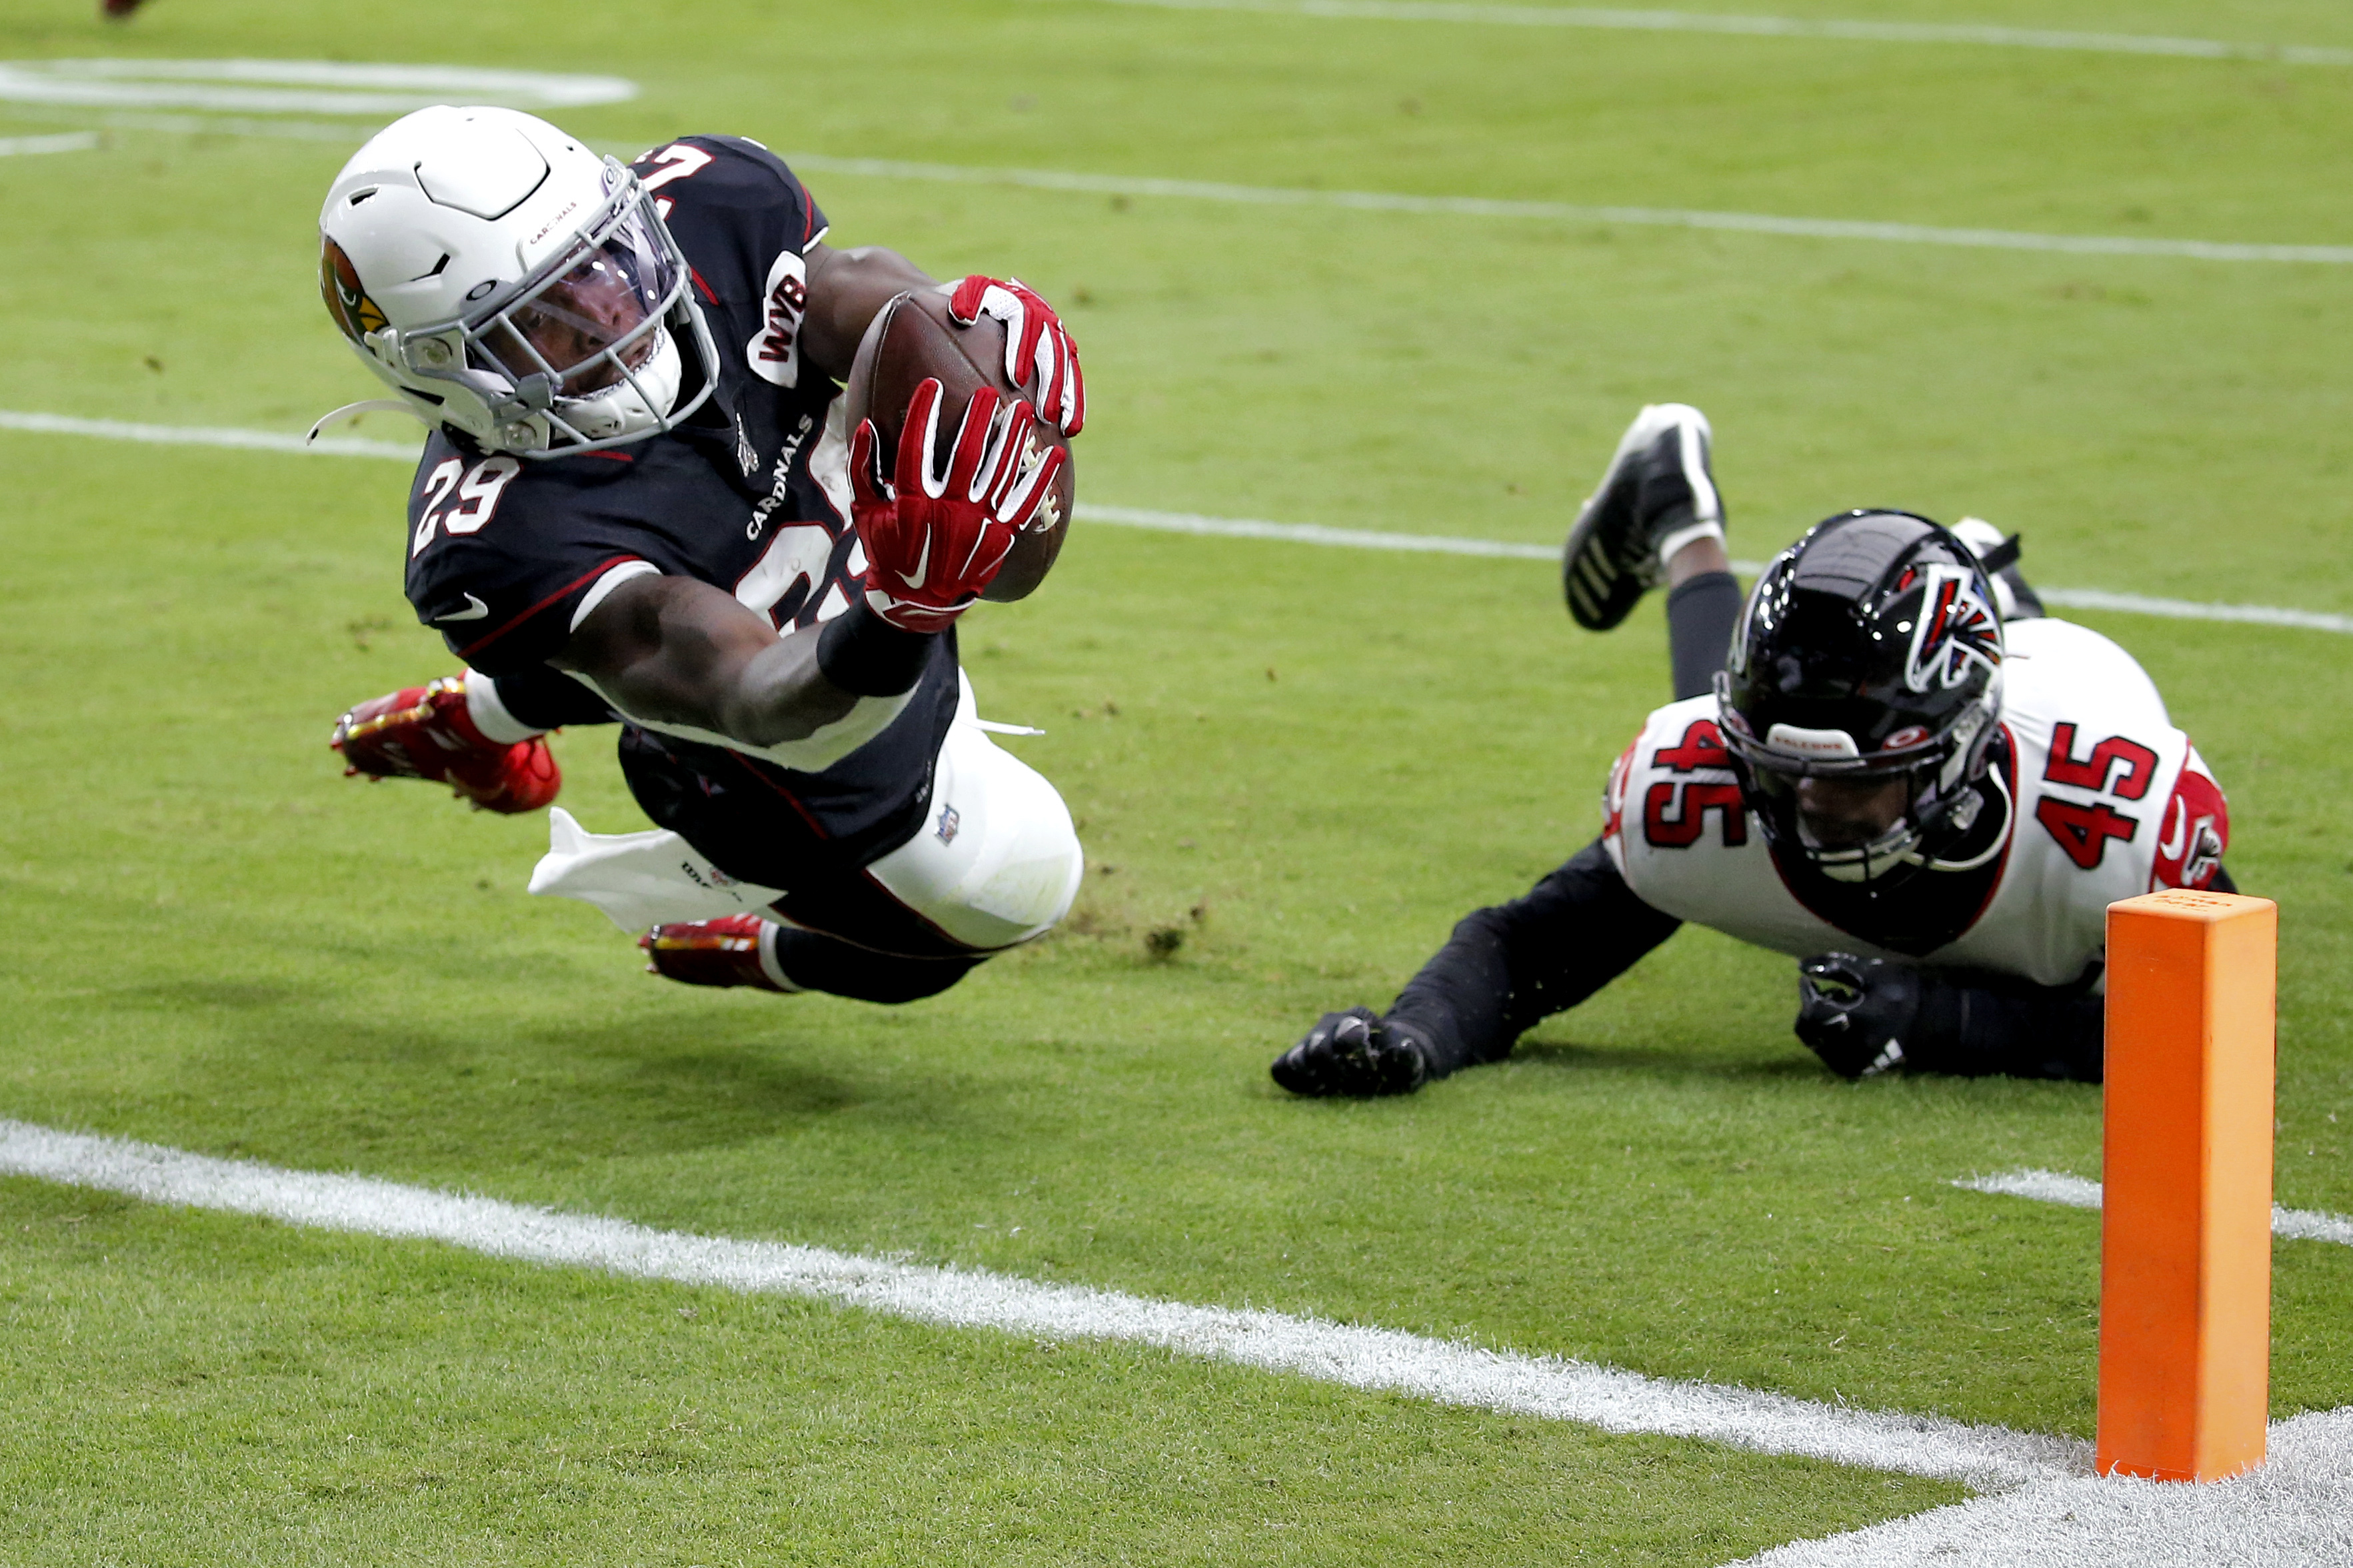 Cardinals beat Falcons 34-33 after Bryant's extra point miss